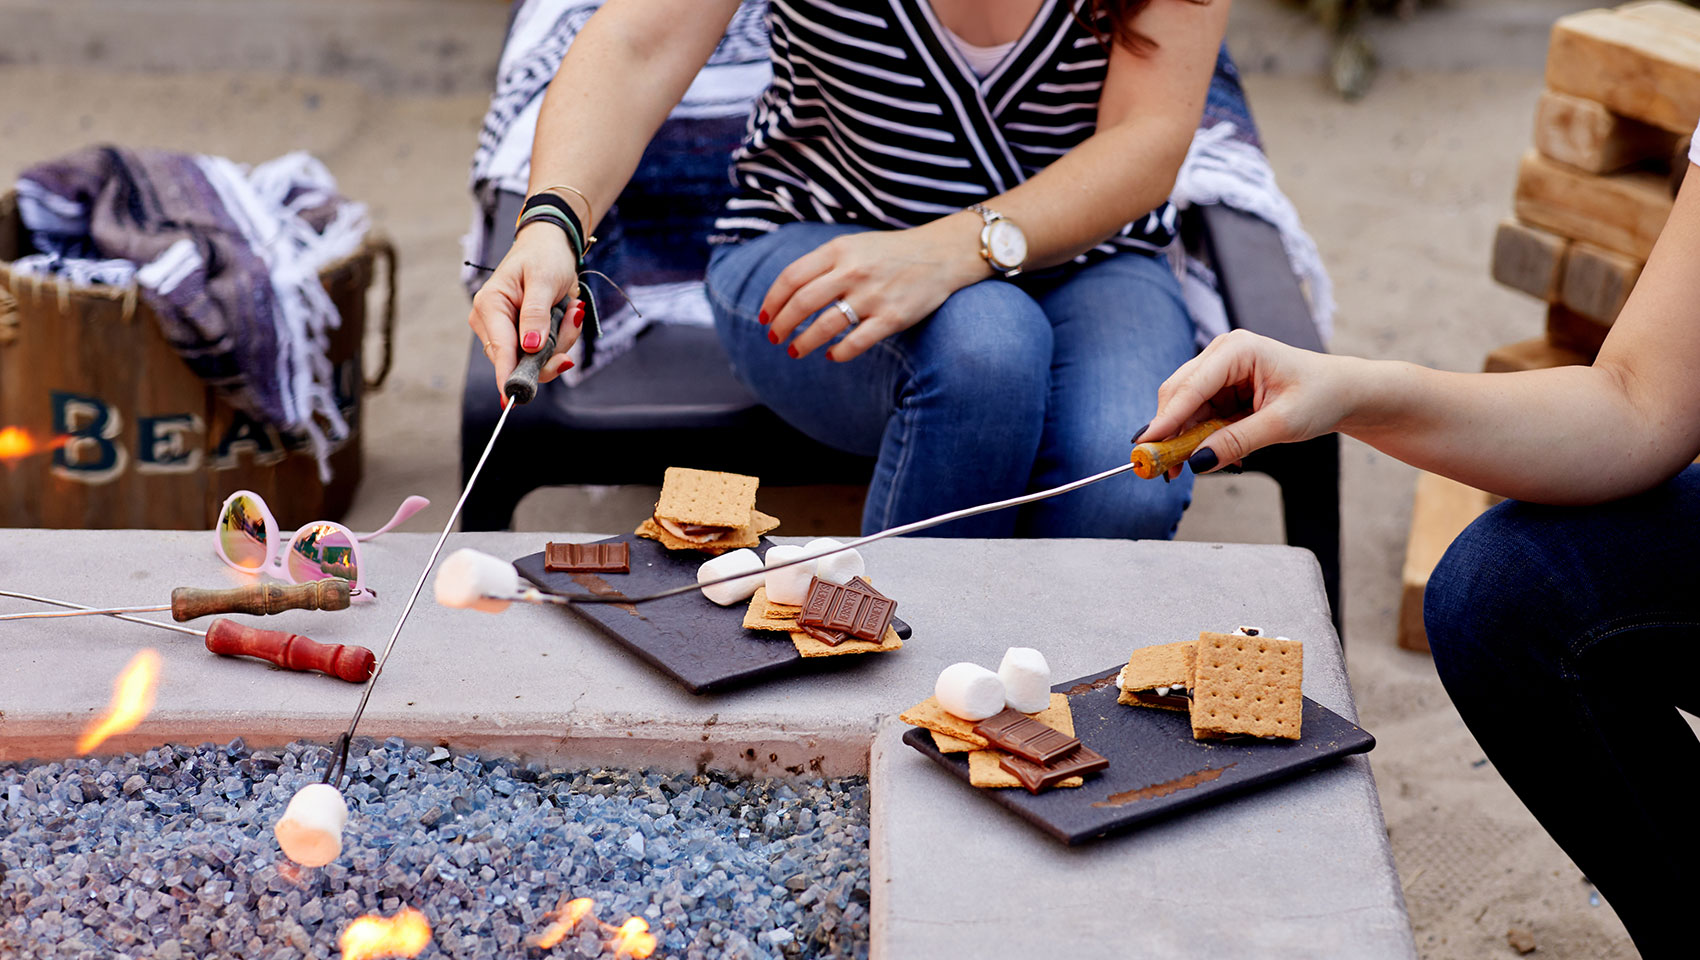 S'Mores on the deck